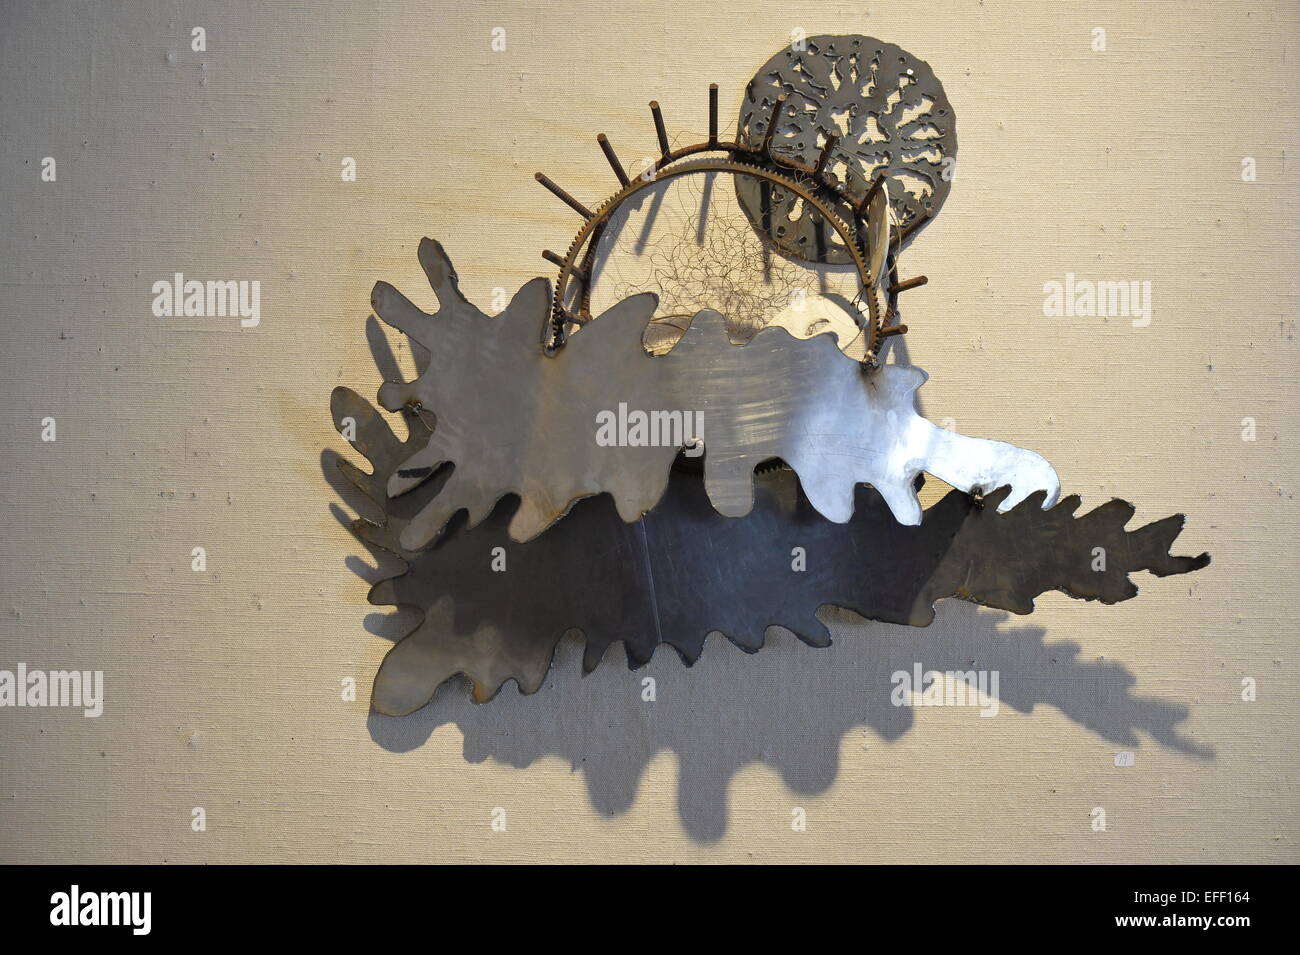 Roslyn, New York, USA. January 31, 2015. Metal sculpture by artist Thea Lanzisero is one of the works of art on exhibit at Artists Reception for 'The Alchemists' at Bryant Library. Stock Photo